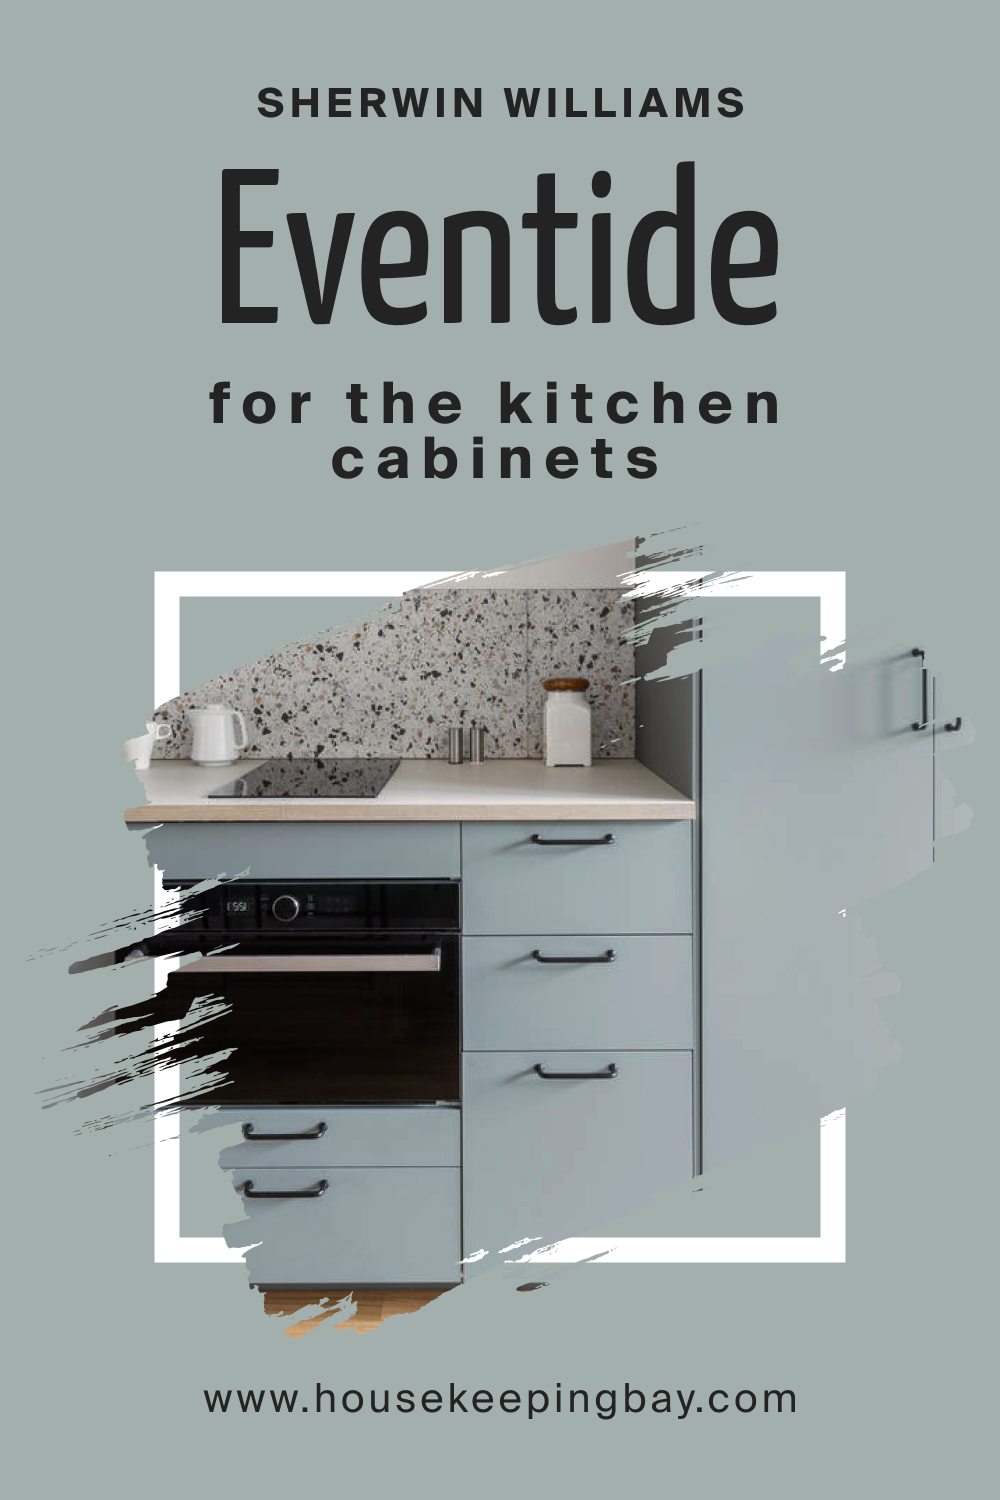 Sherwin Williams. SW 9643 Eventide For the Kitchen Cabinets